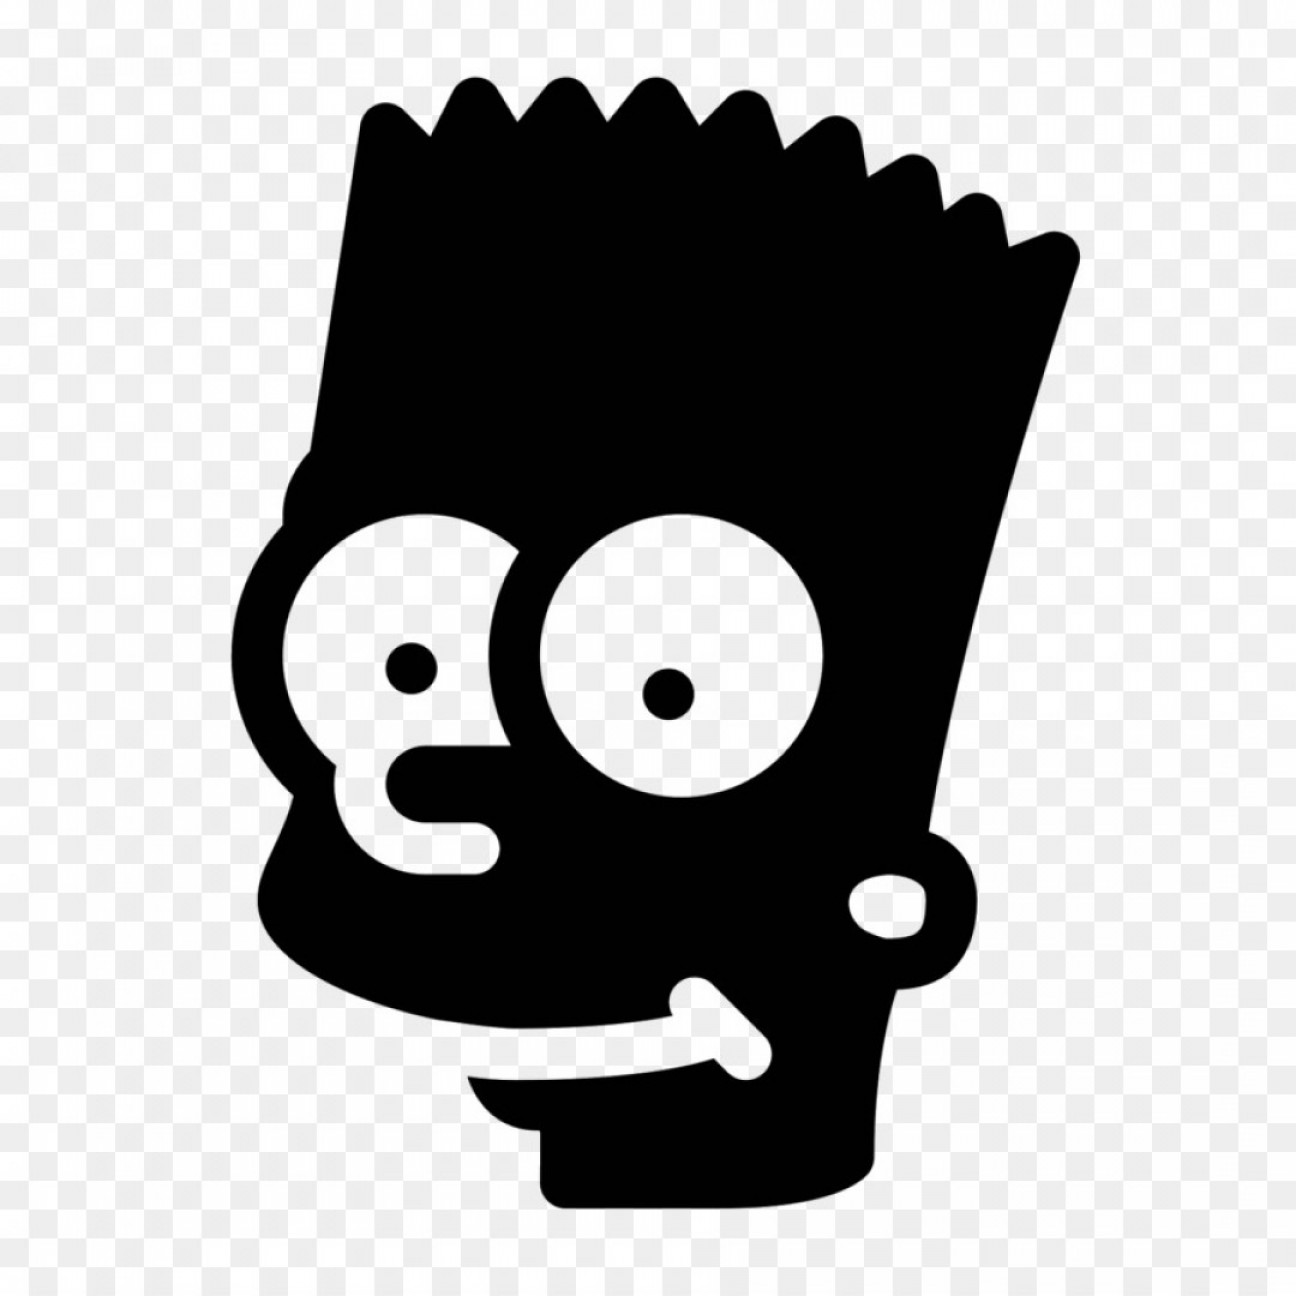 Simpsons Black And White Vector Graphics